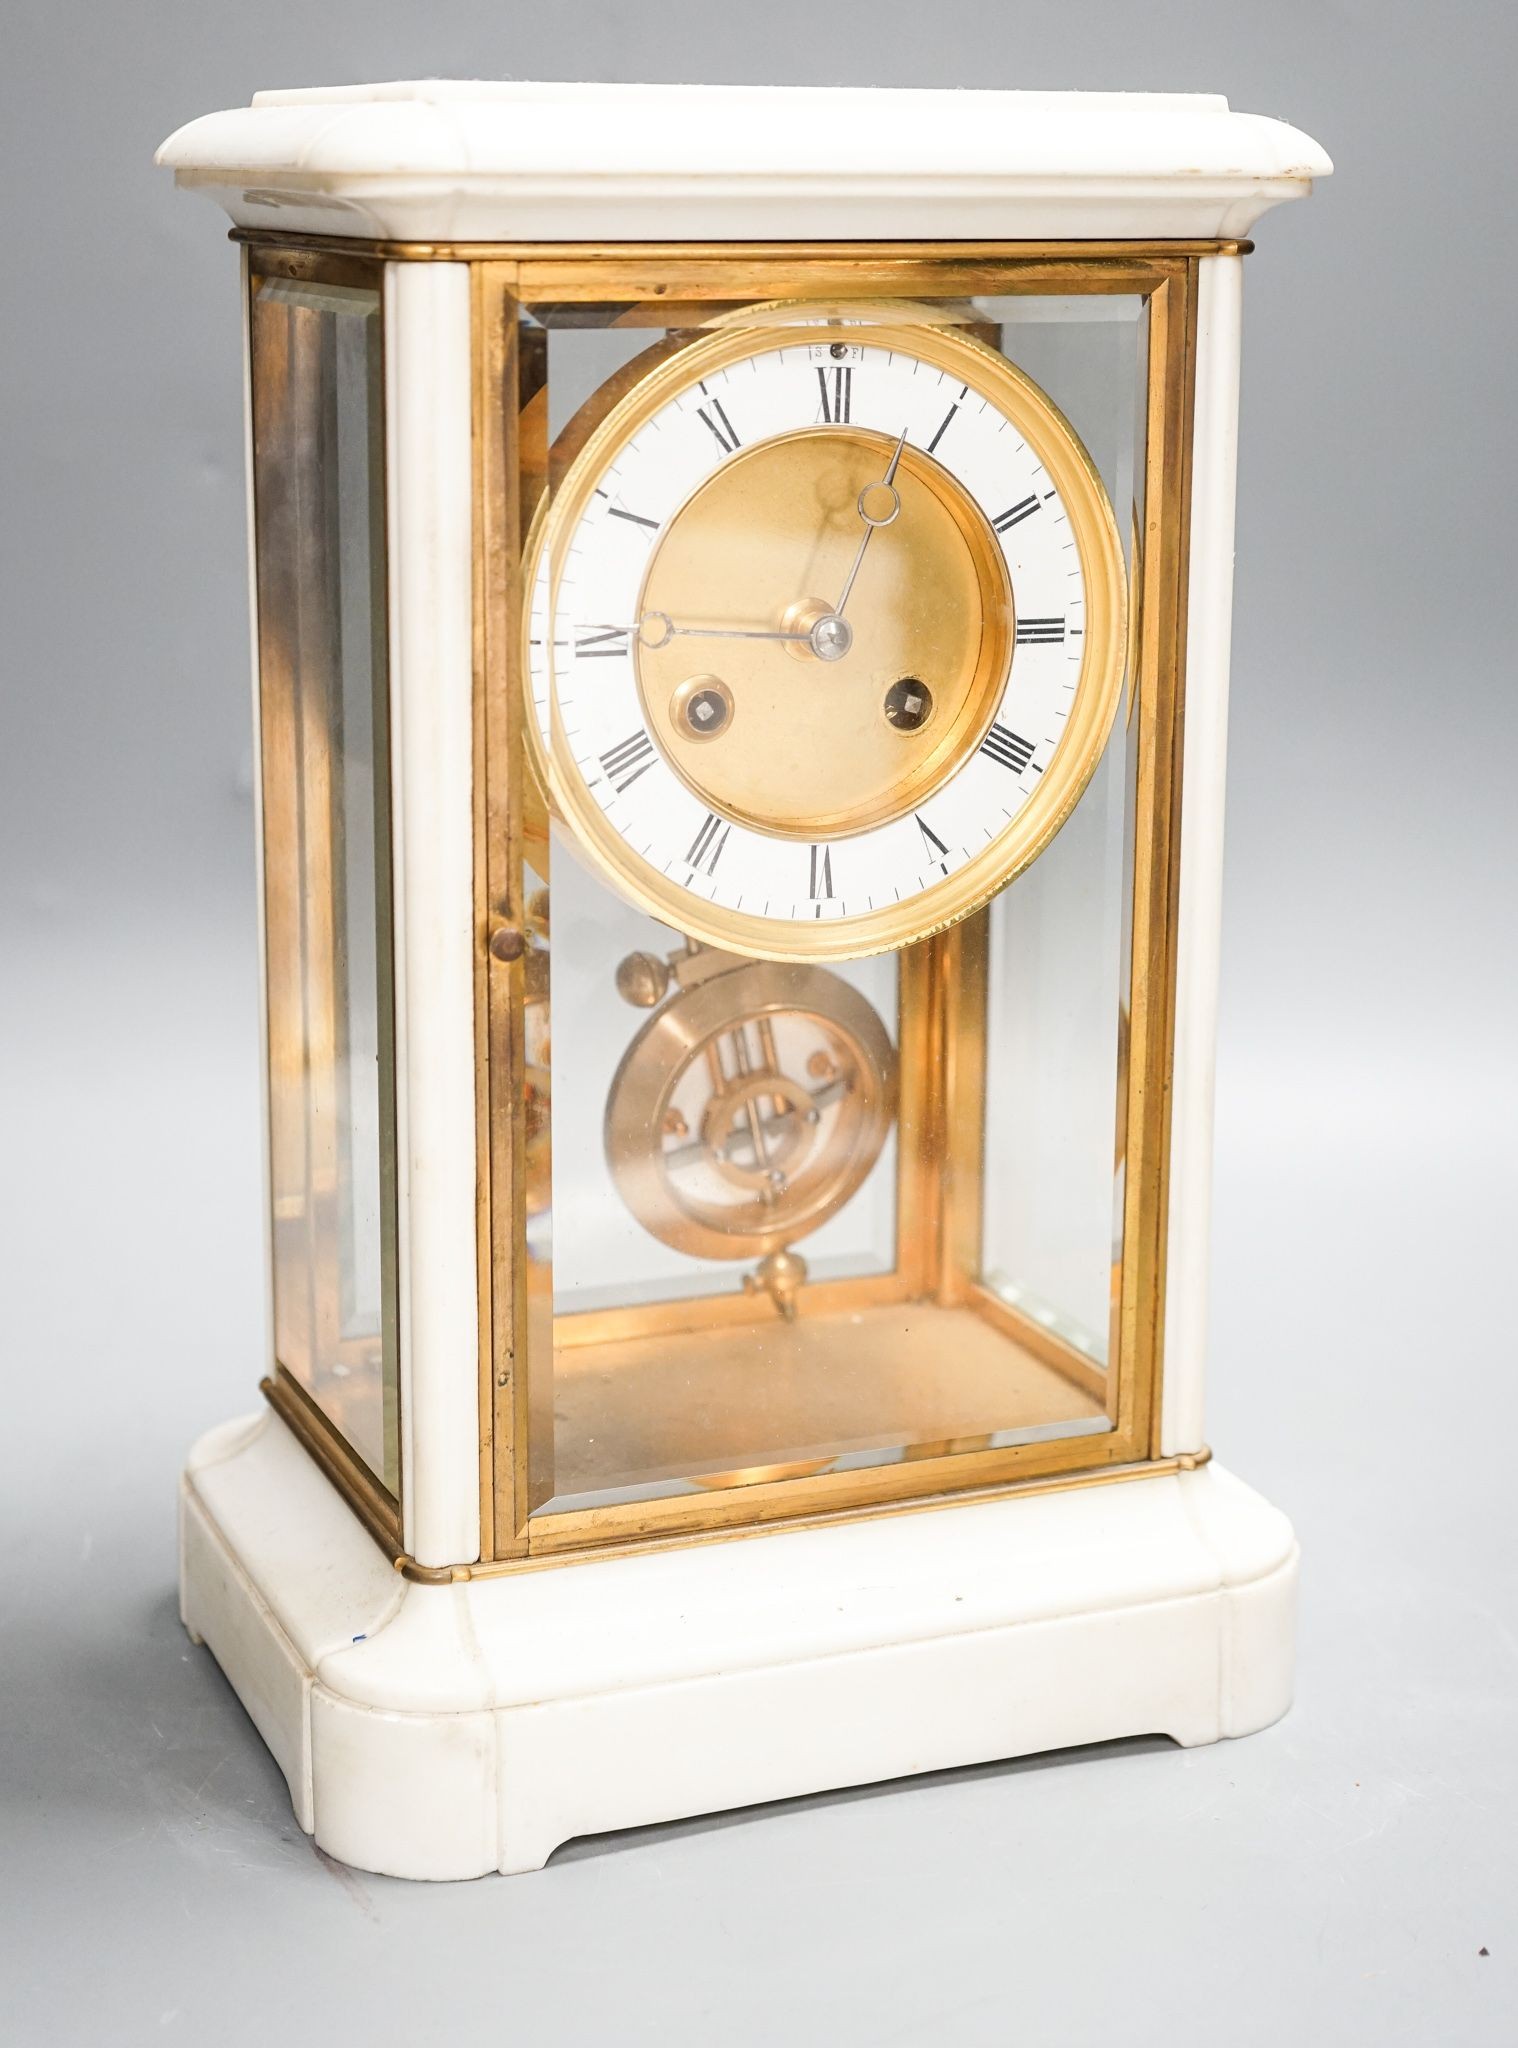 An unusual French white marble and brass cased four glass mantel clock, late 19th century, bi-metallic pendulum, no key. 32cm